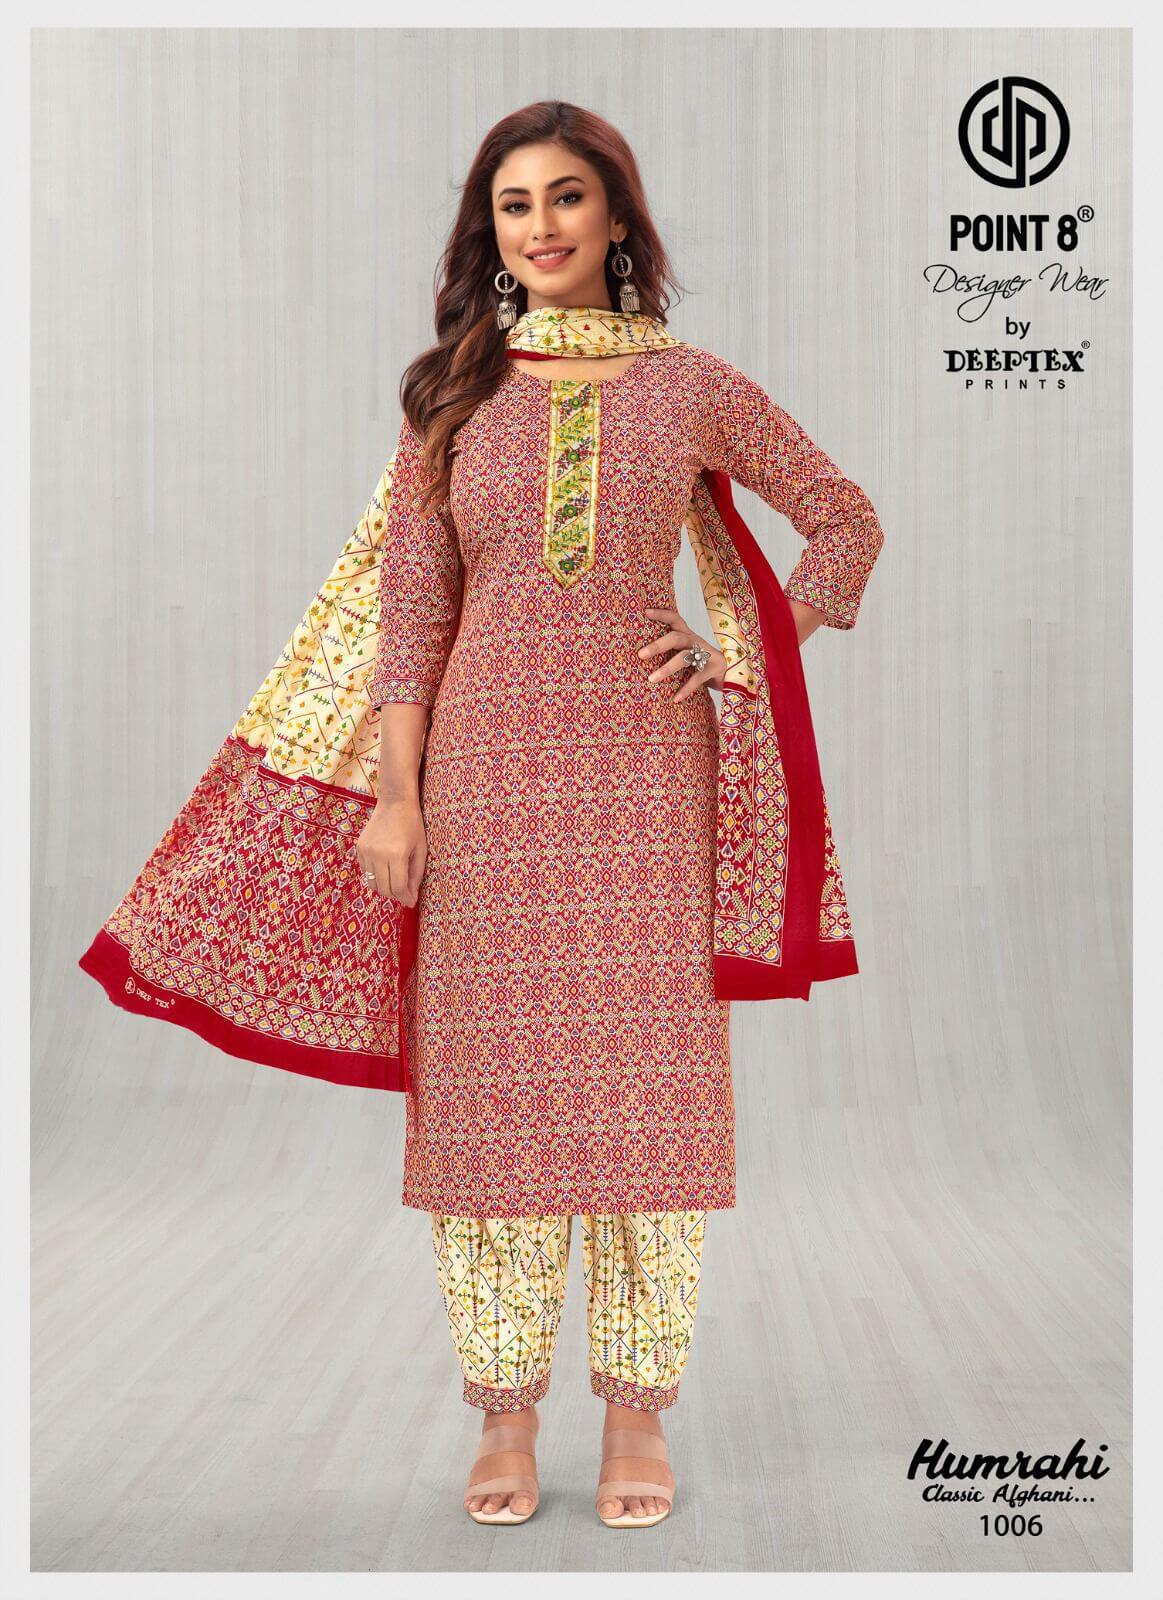 Deeptex Point 8 Humrahi vol 1 collection 6